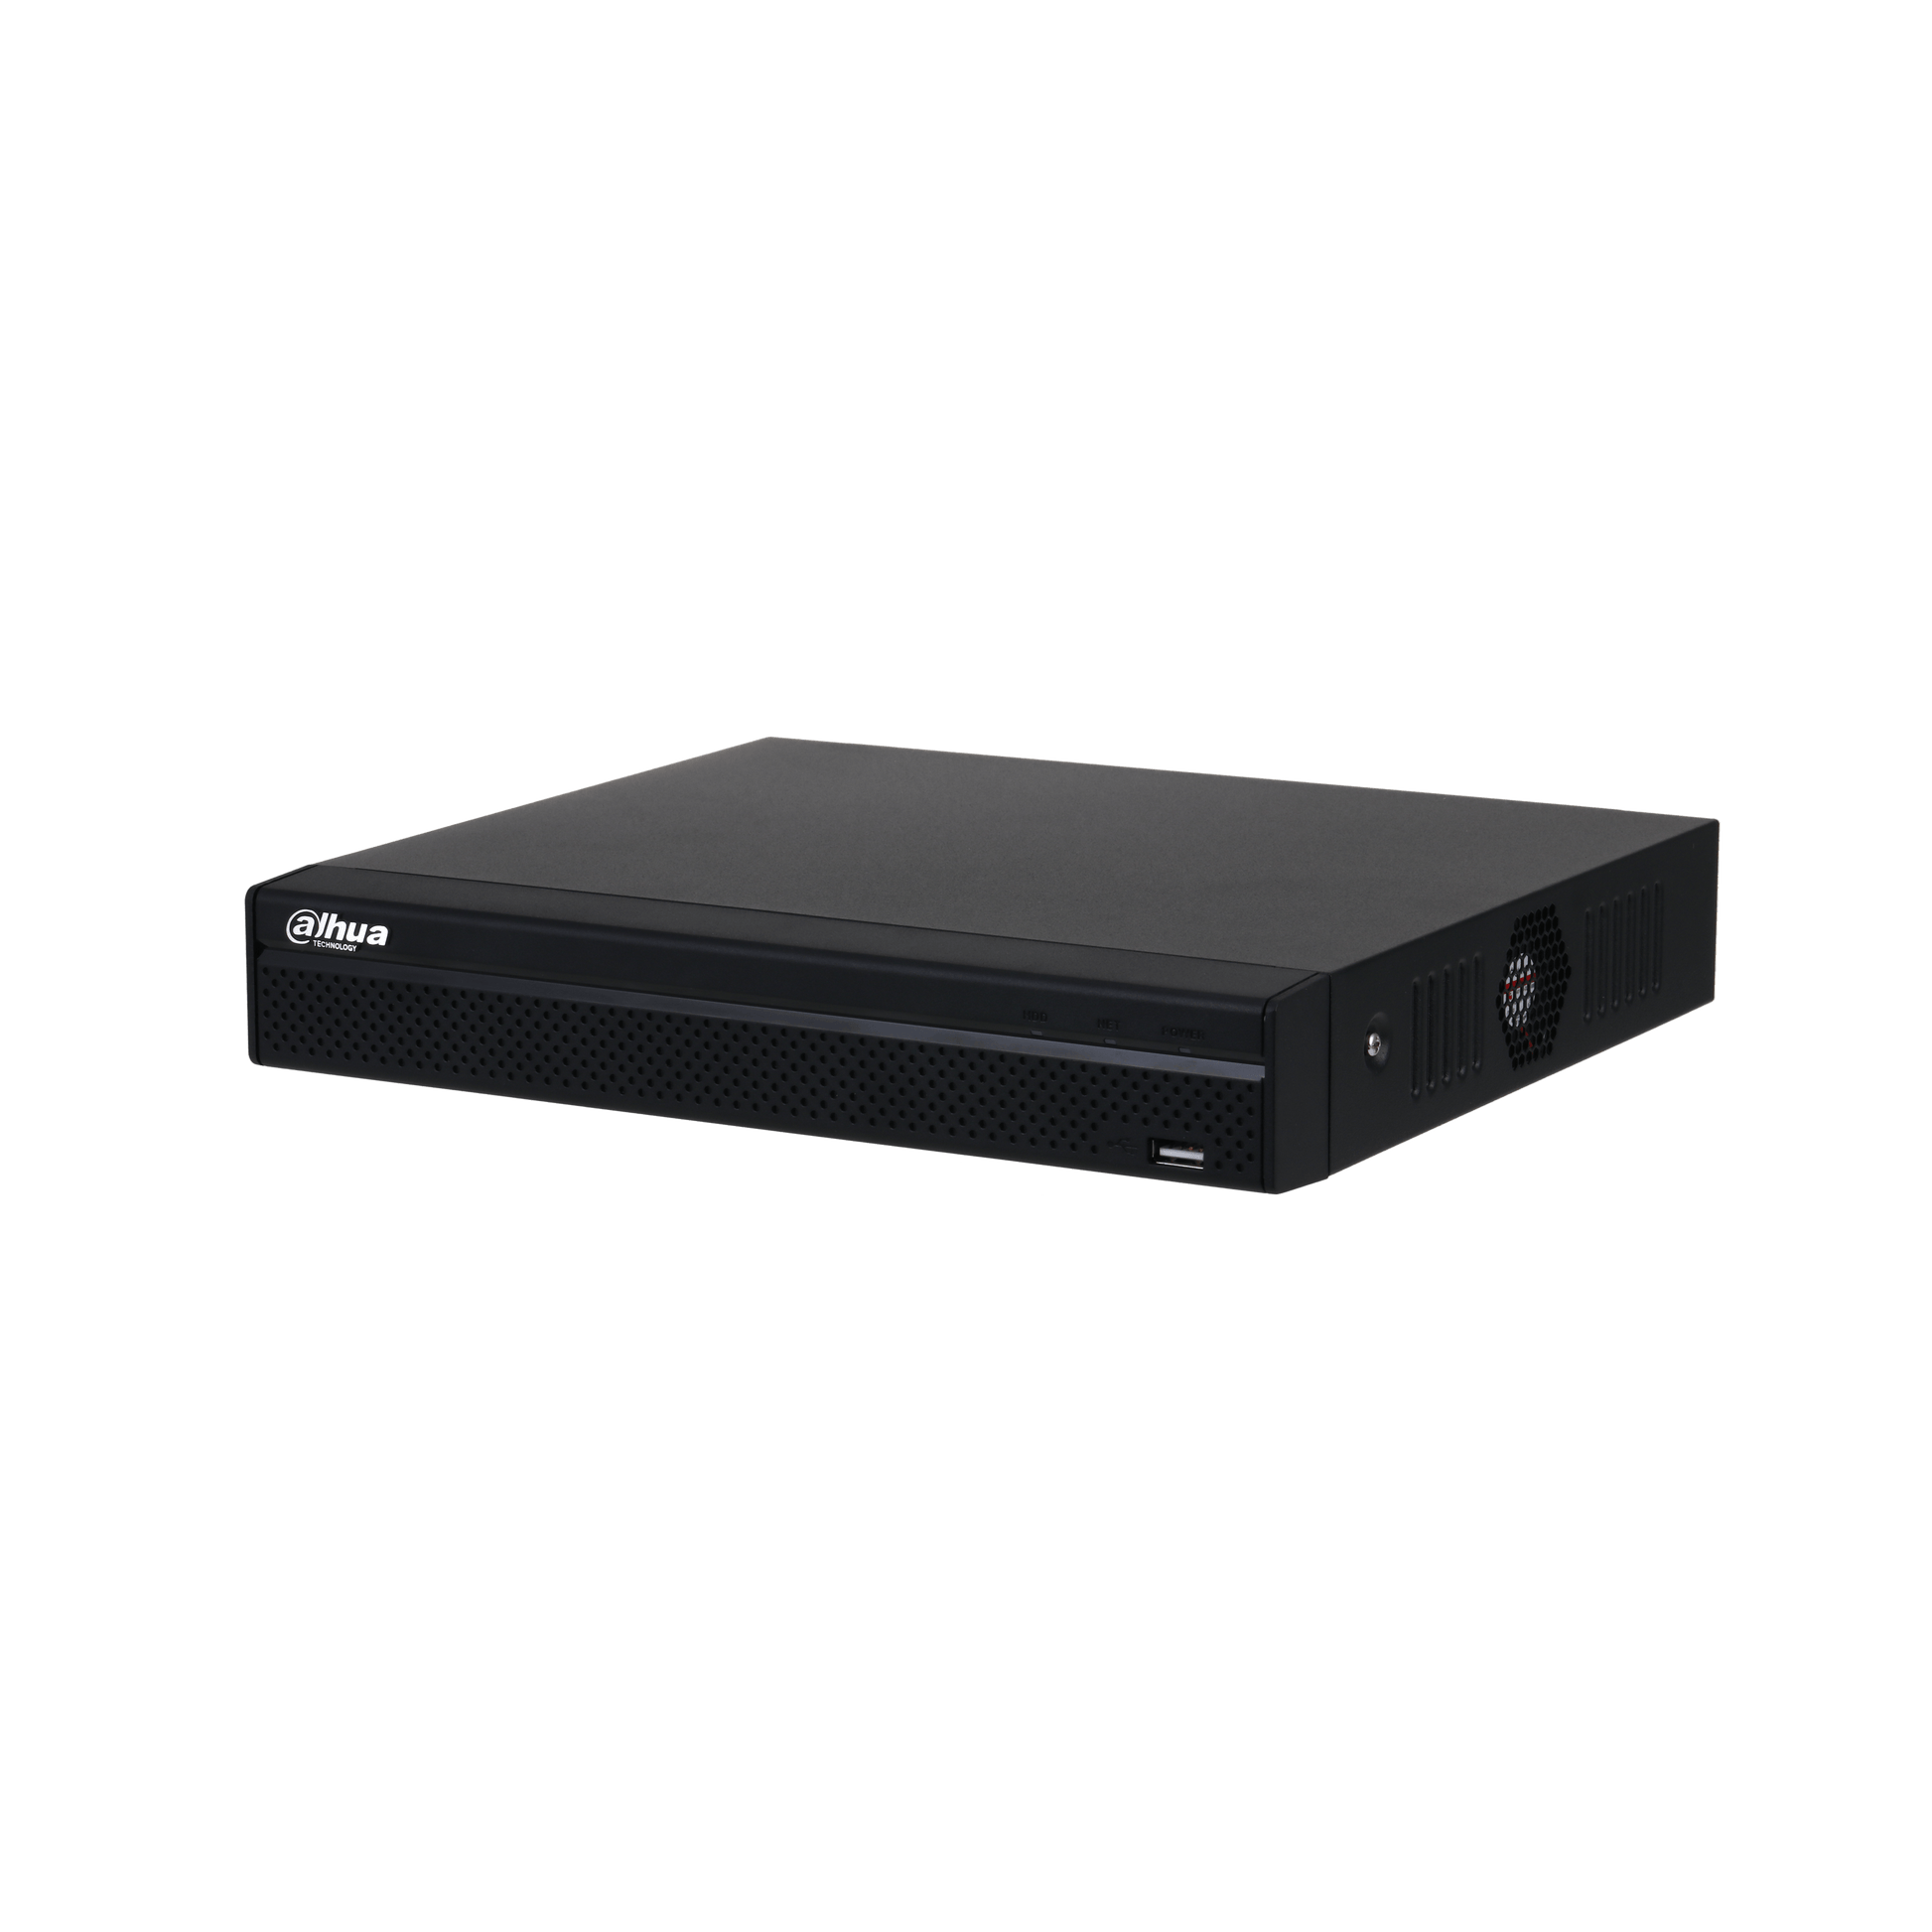 8 Channel Dahua DHI-NVR4108HS-8P-4KS2/L 8 Channel Compact 1HDD 1U 8PoE Network Video Recorder